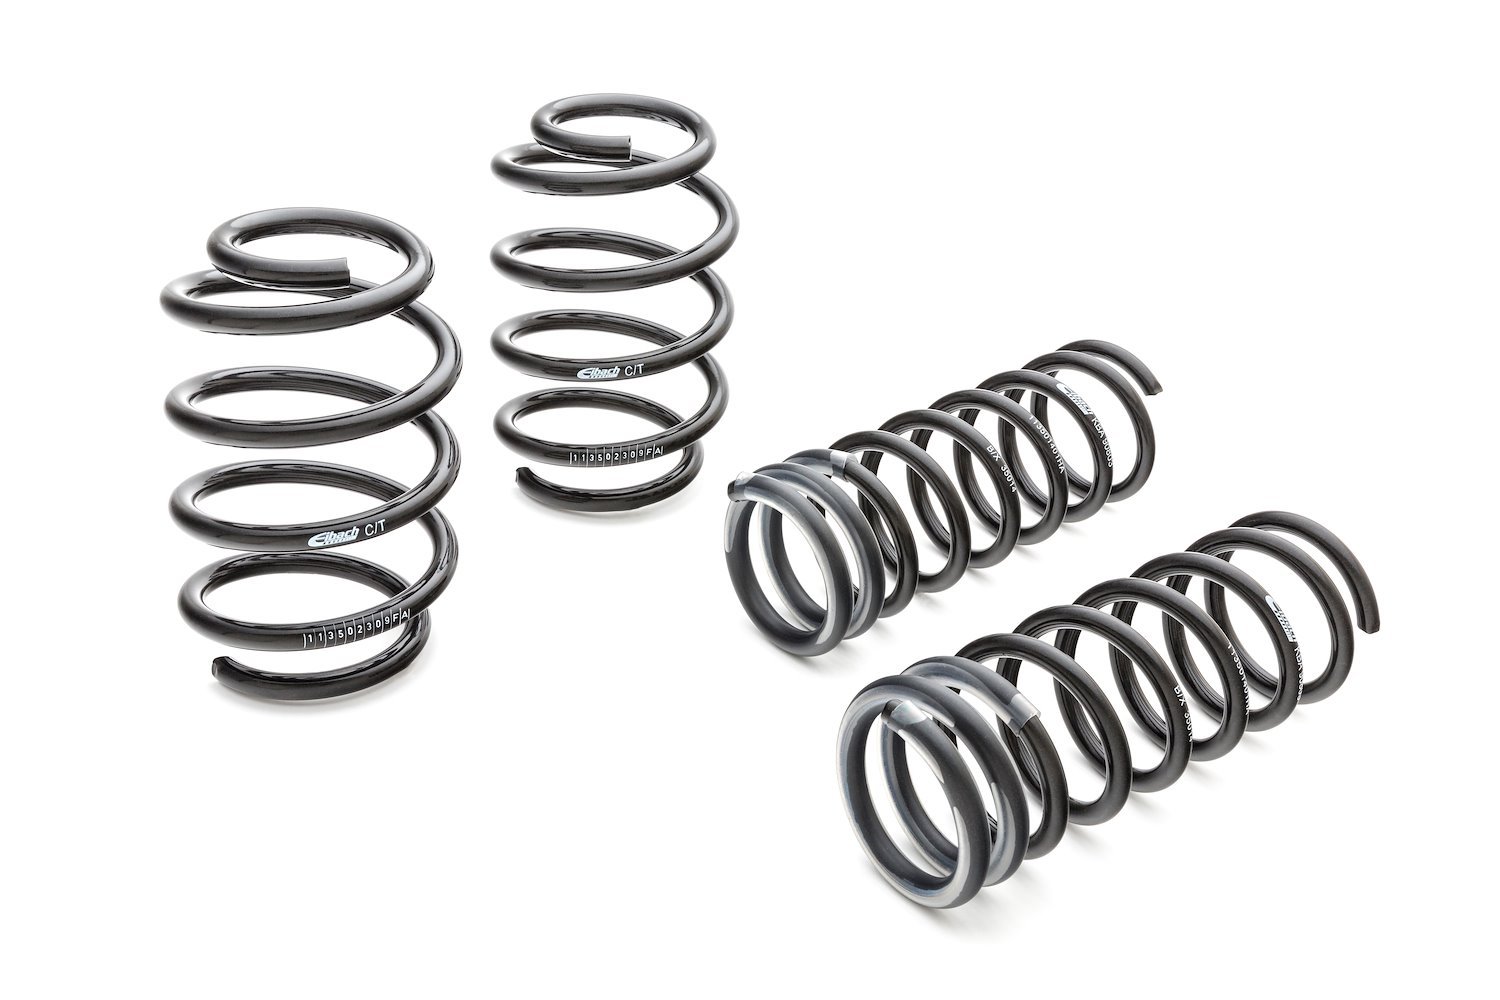 15101.140 Pro-Kit Lowering Springs 2008-2010 Audi A5 Quattro - 1 in. Front/.800 in. Rear Drop